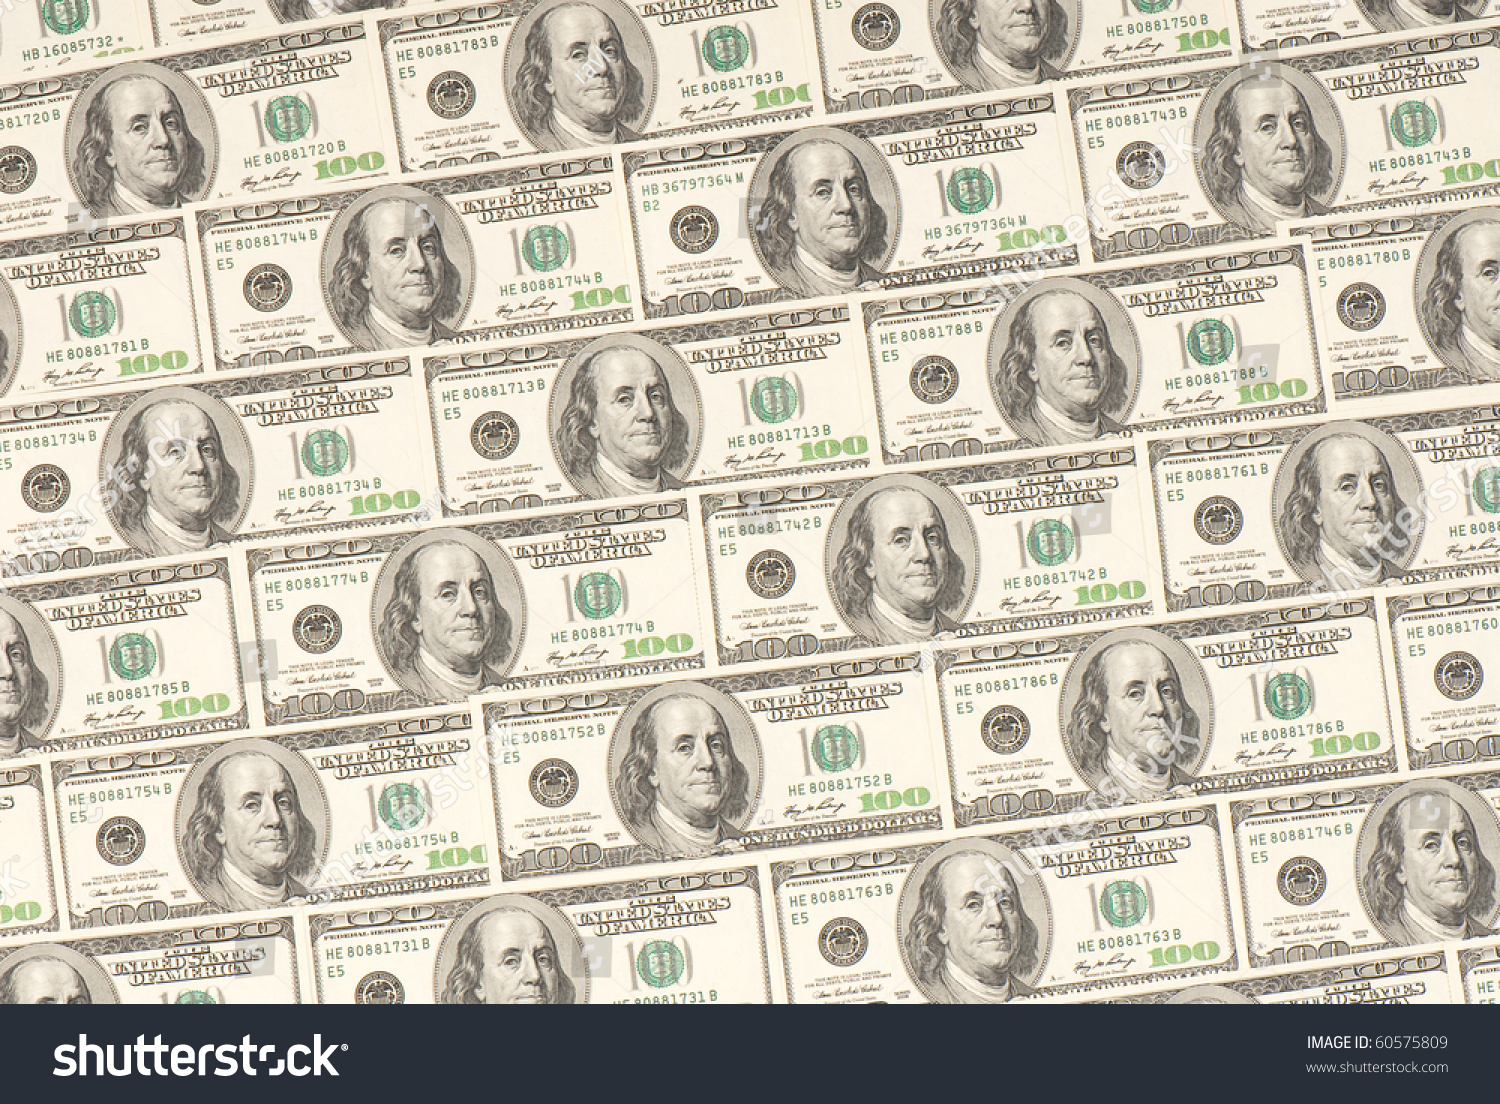 Background American Money High Resolution Concept Stock Photo Edit Now